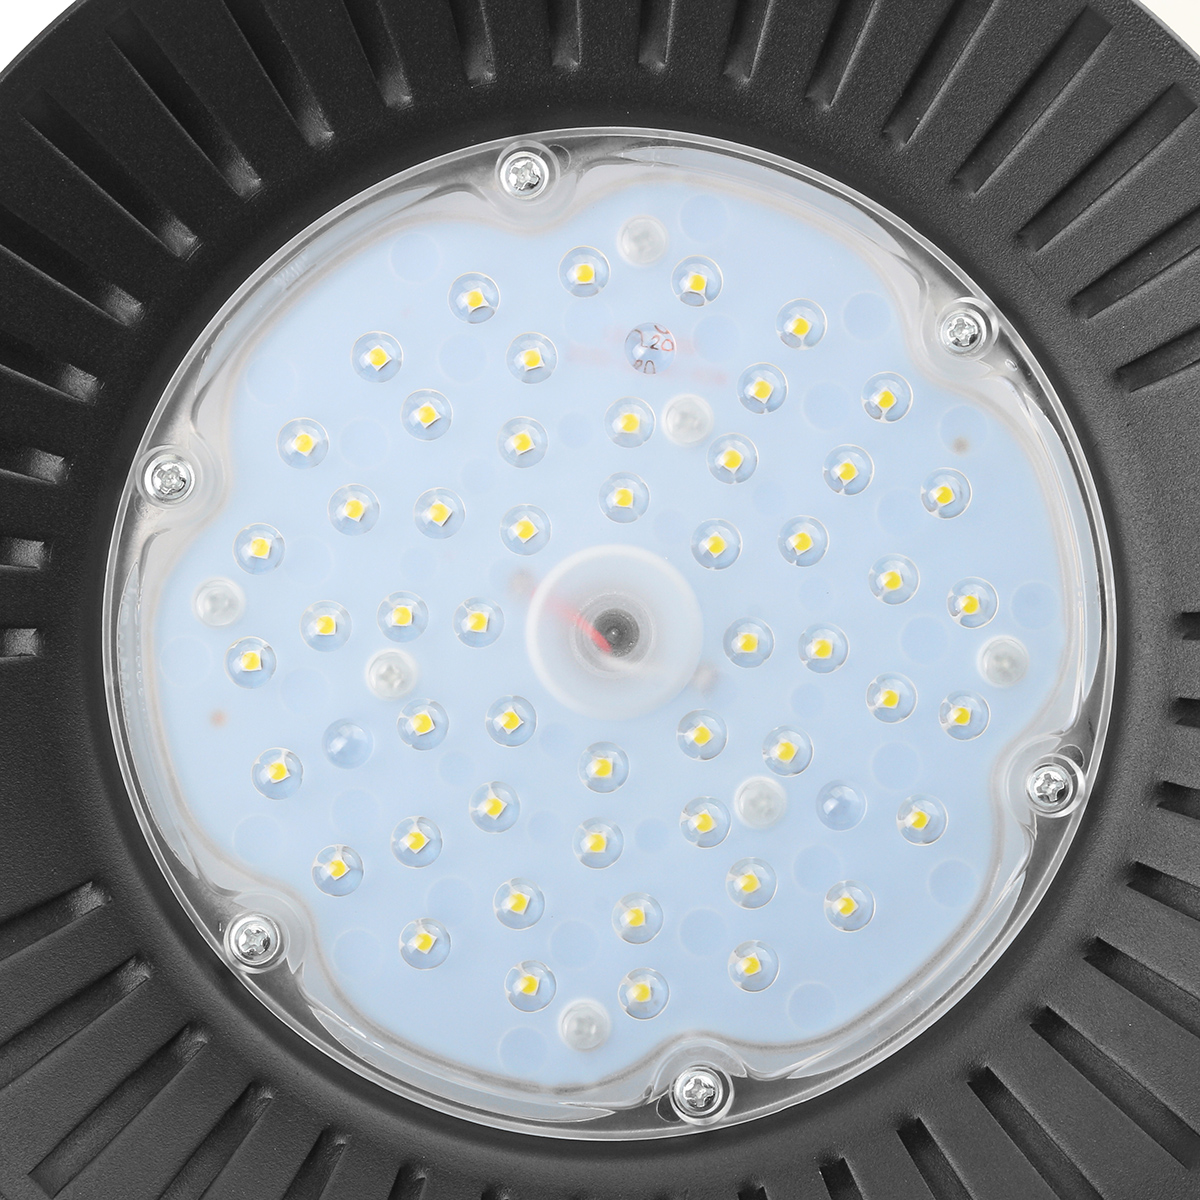 Find 60/100/150/200W UFO LED Flood Light High Bay 6000K Warehouse Industrial Lighting for Sale on Gipsybee.com with cryptocurrencies